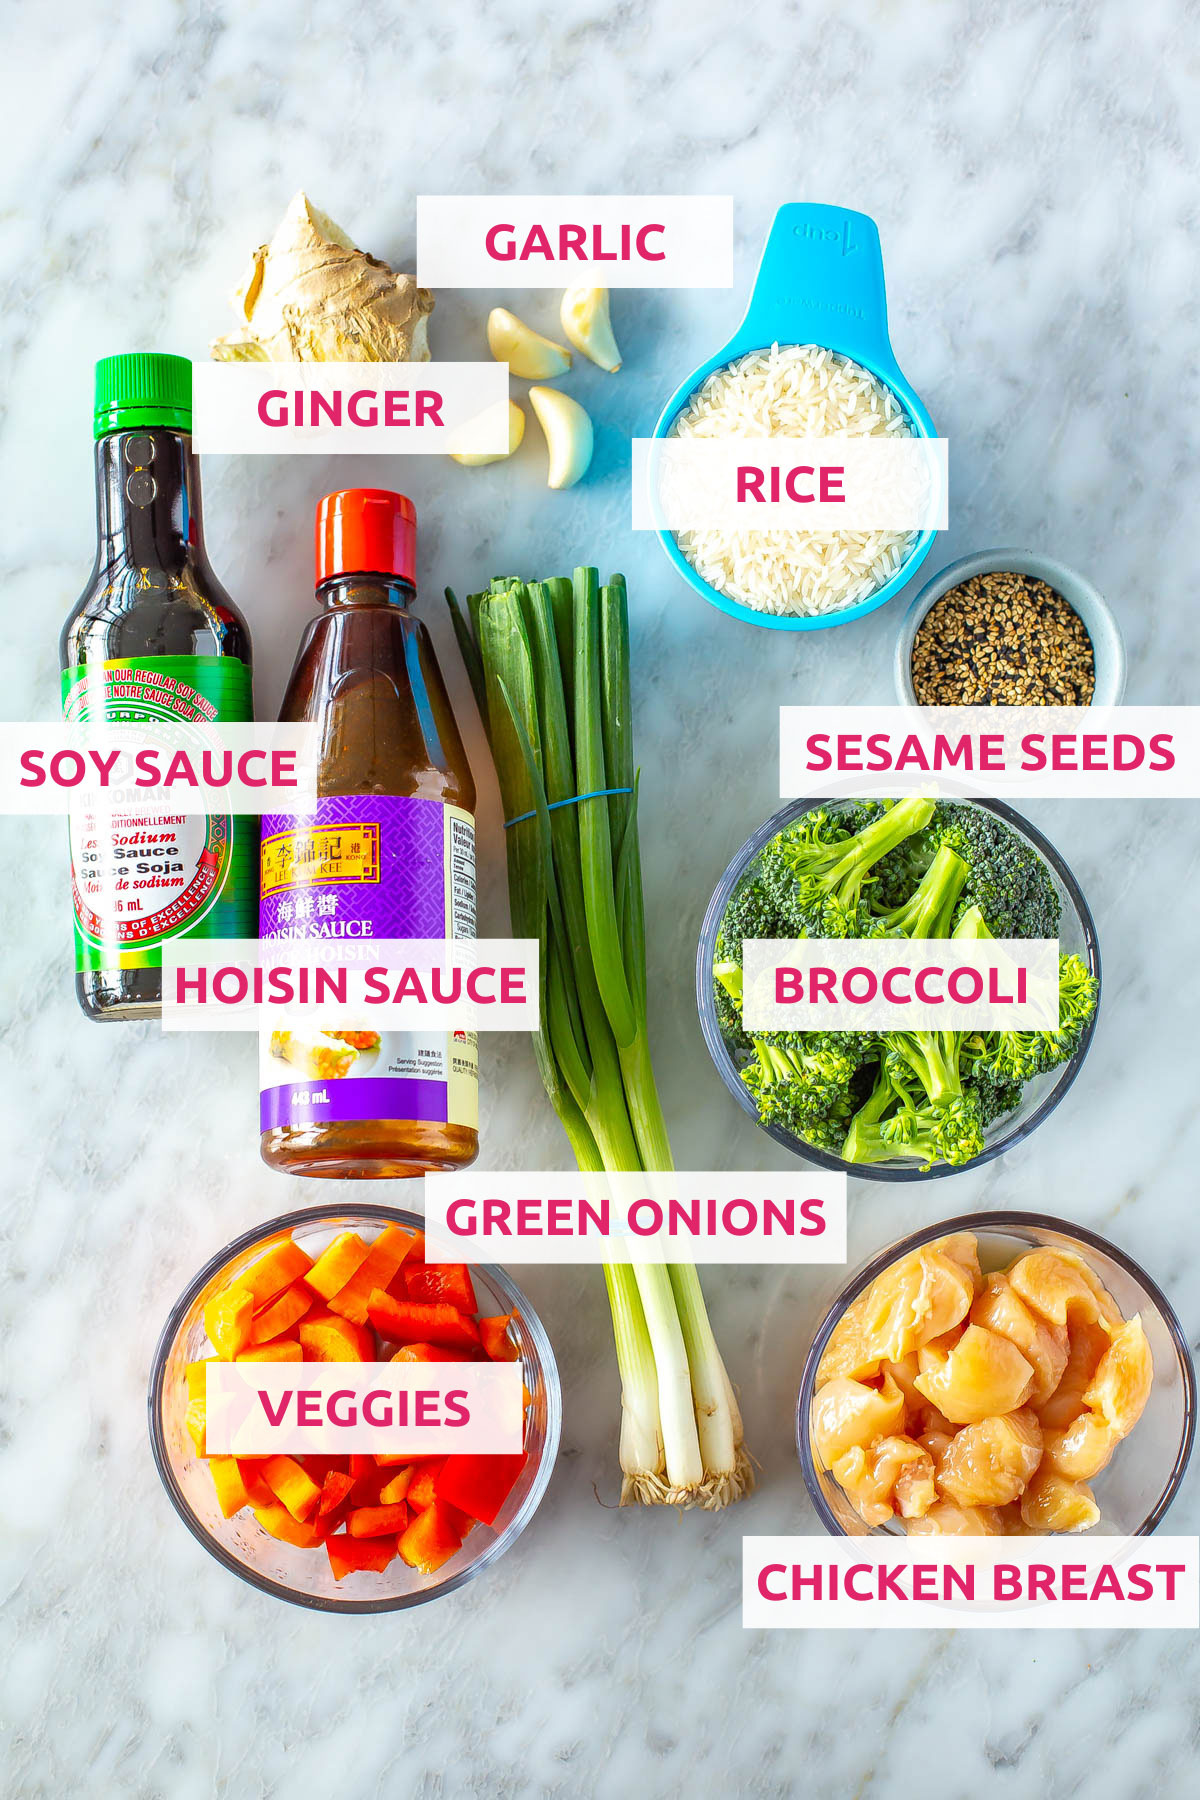 Ingredients for Instant Pot teriyaki chicken bowls: rice, garlic, ginger, soy sauce, hoisin sauce, veggies, green onions, chicken breast, broccoli and sesame seeds.